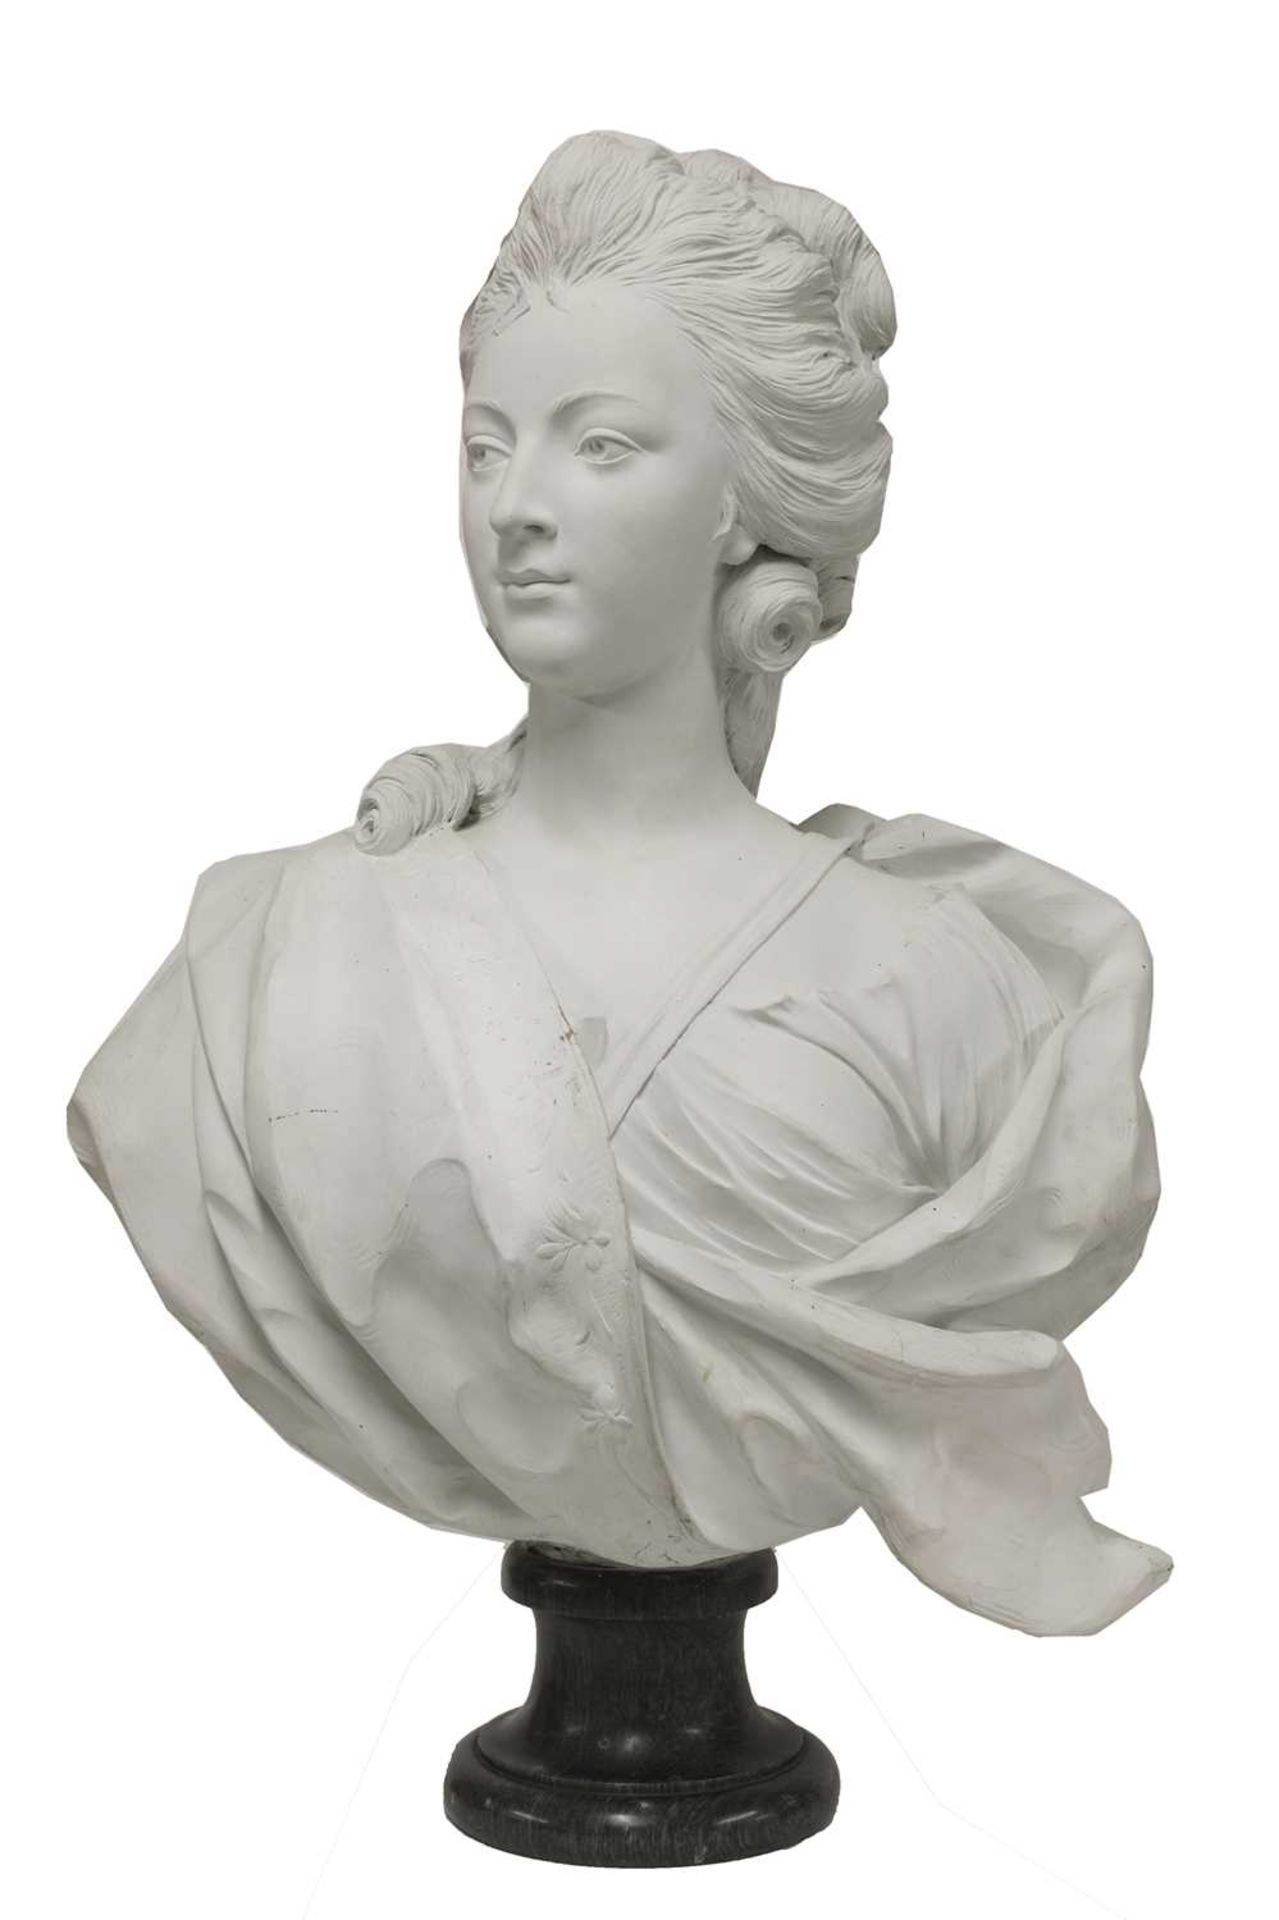 An 18th century-style painted terracotta bust of a woman,